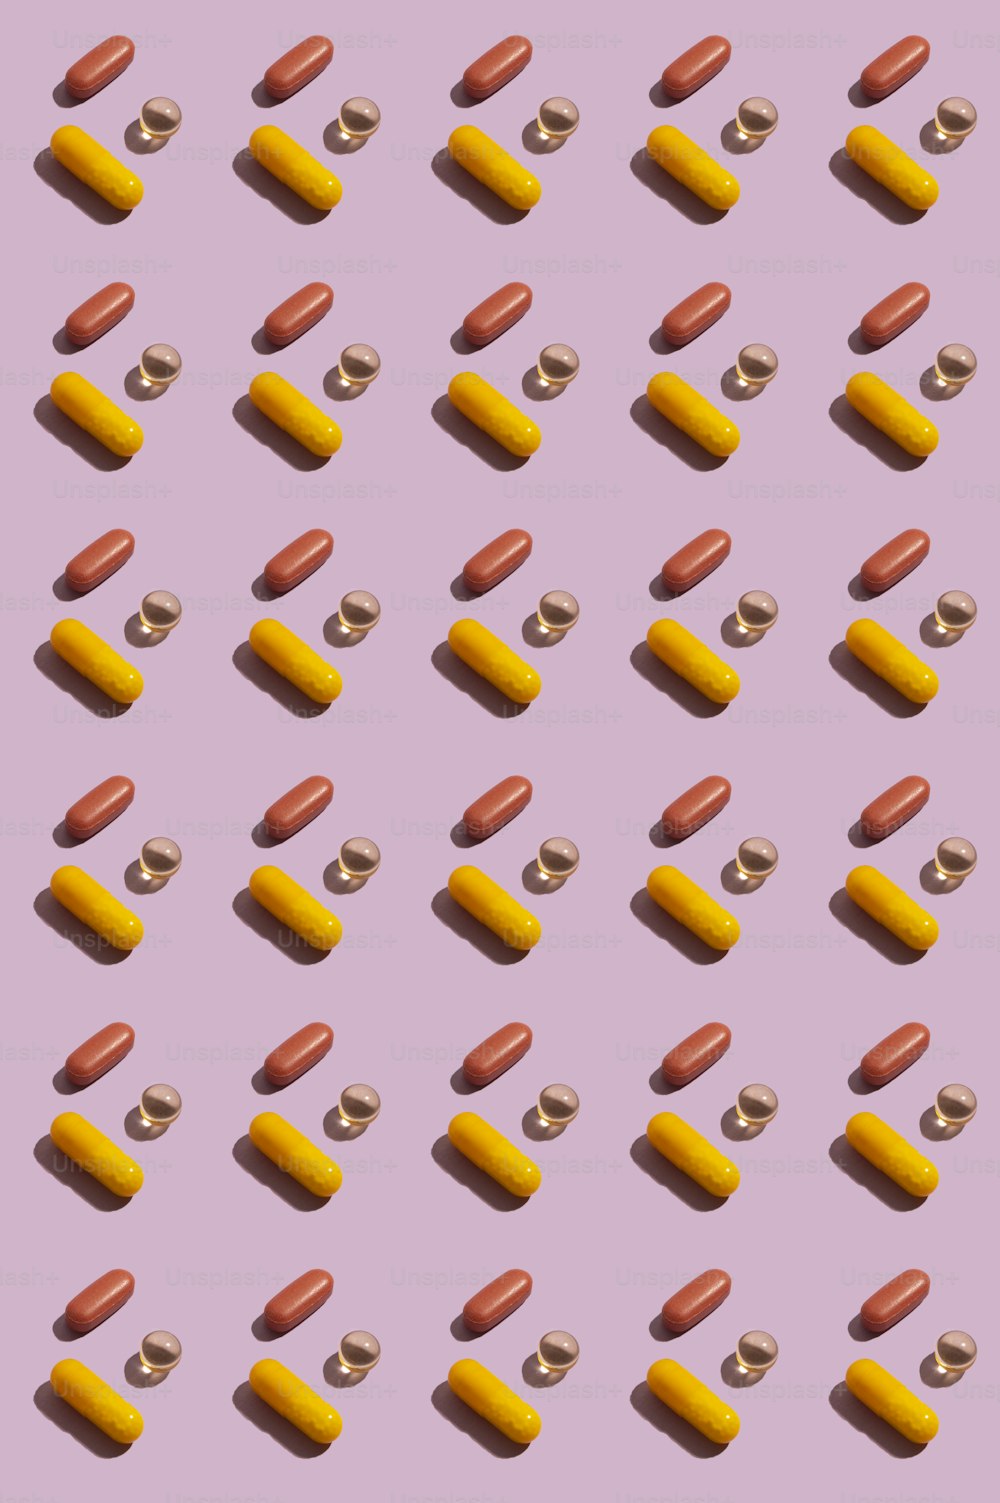 a pattern of hot dogs and pills on a purple background